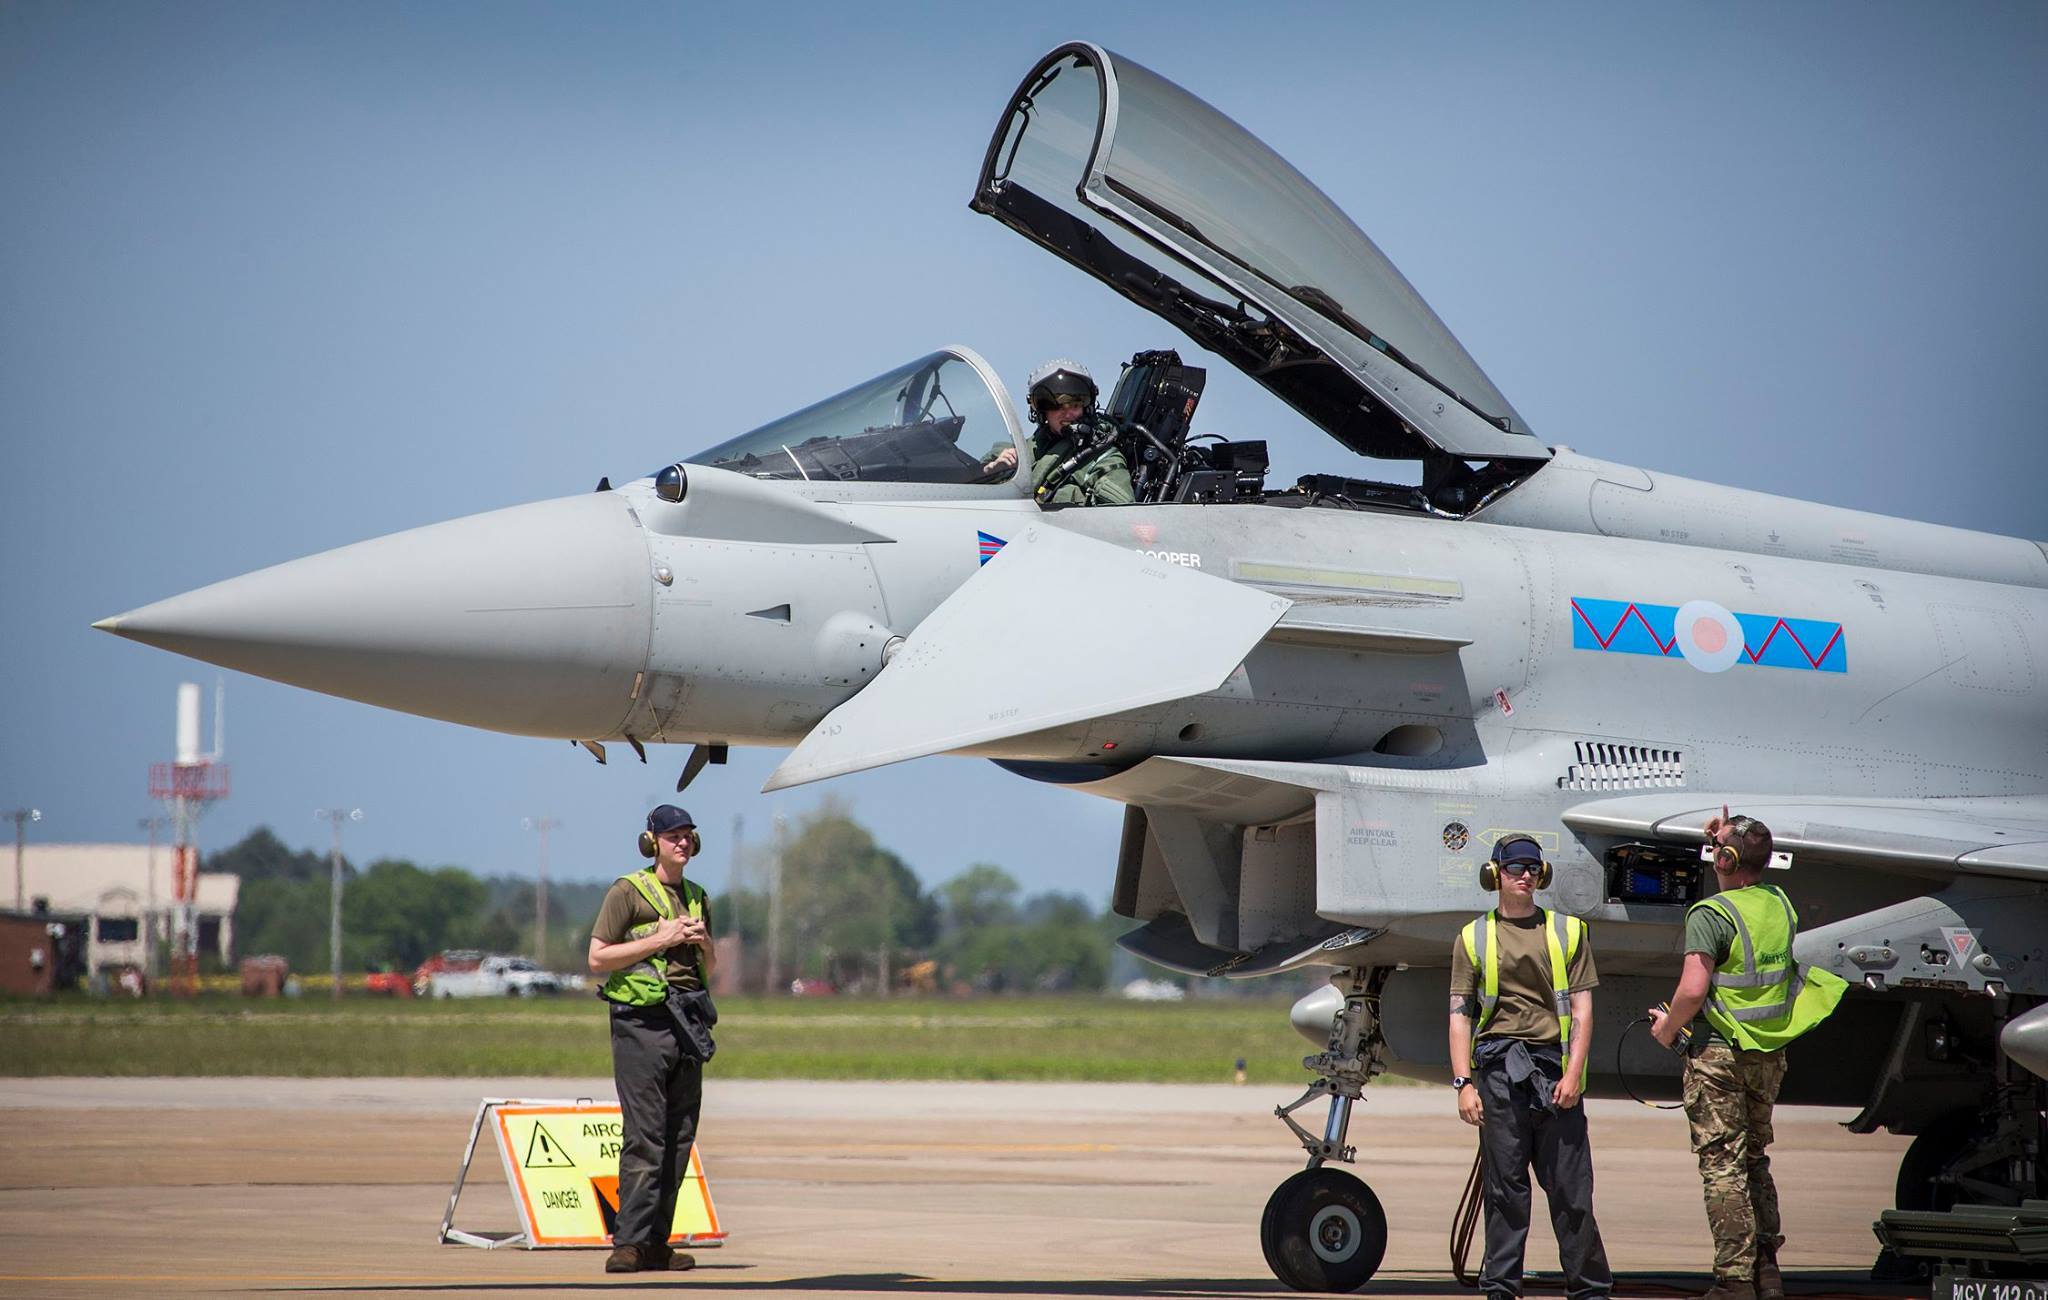 Typhoon crews from 1 (F) Squadron at RAF Lossiemouth have joined American and French colleagues for the exercise.